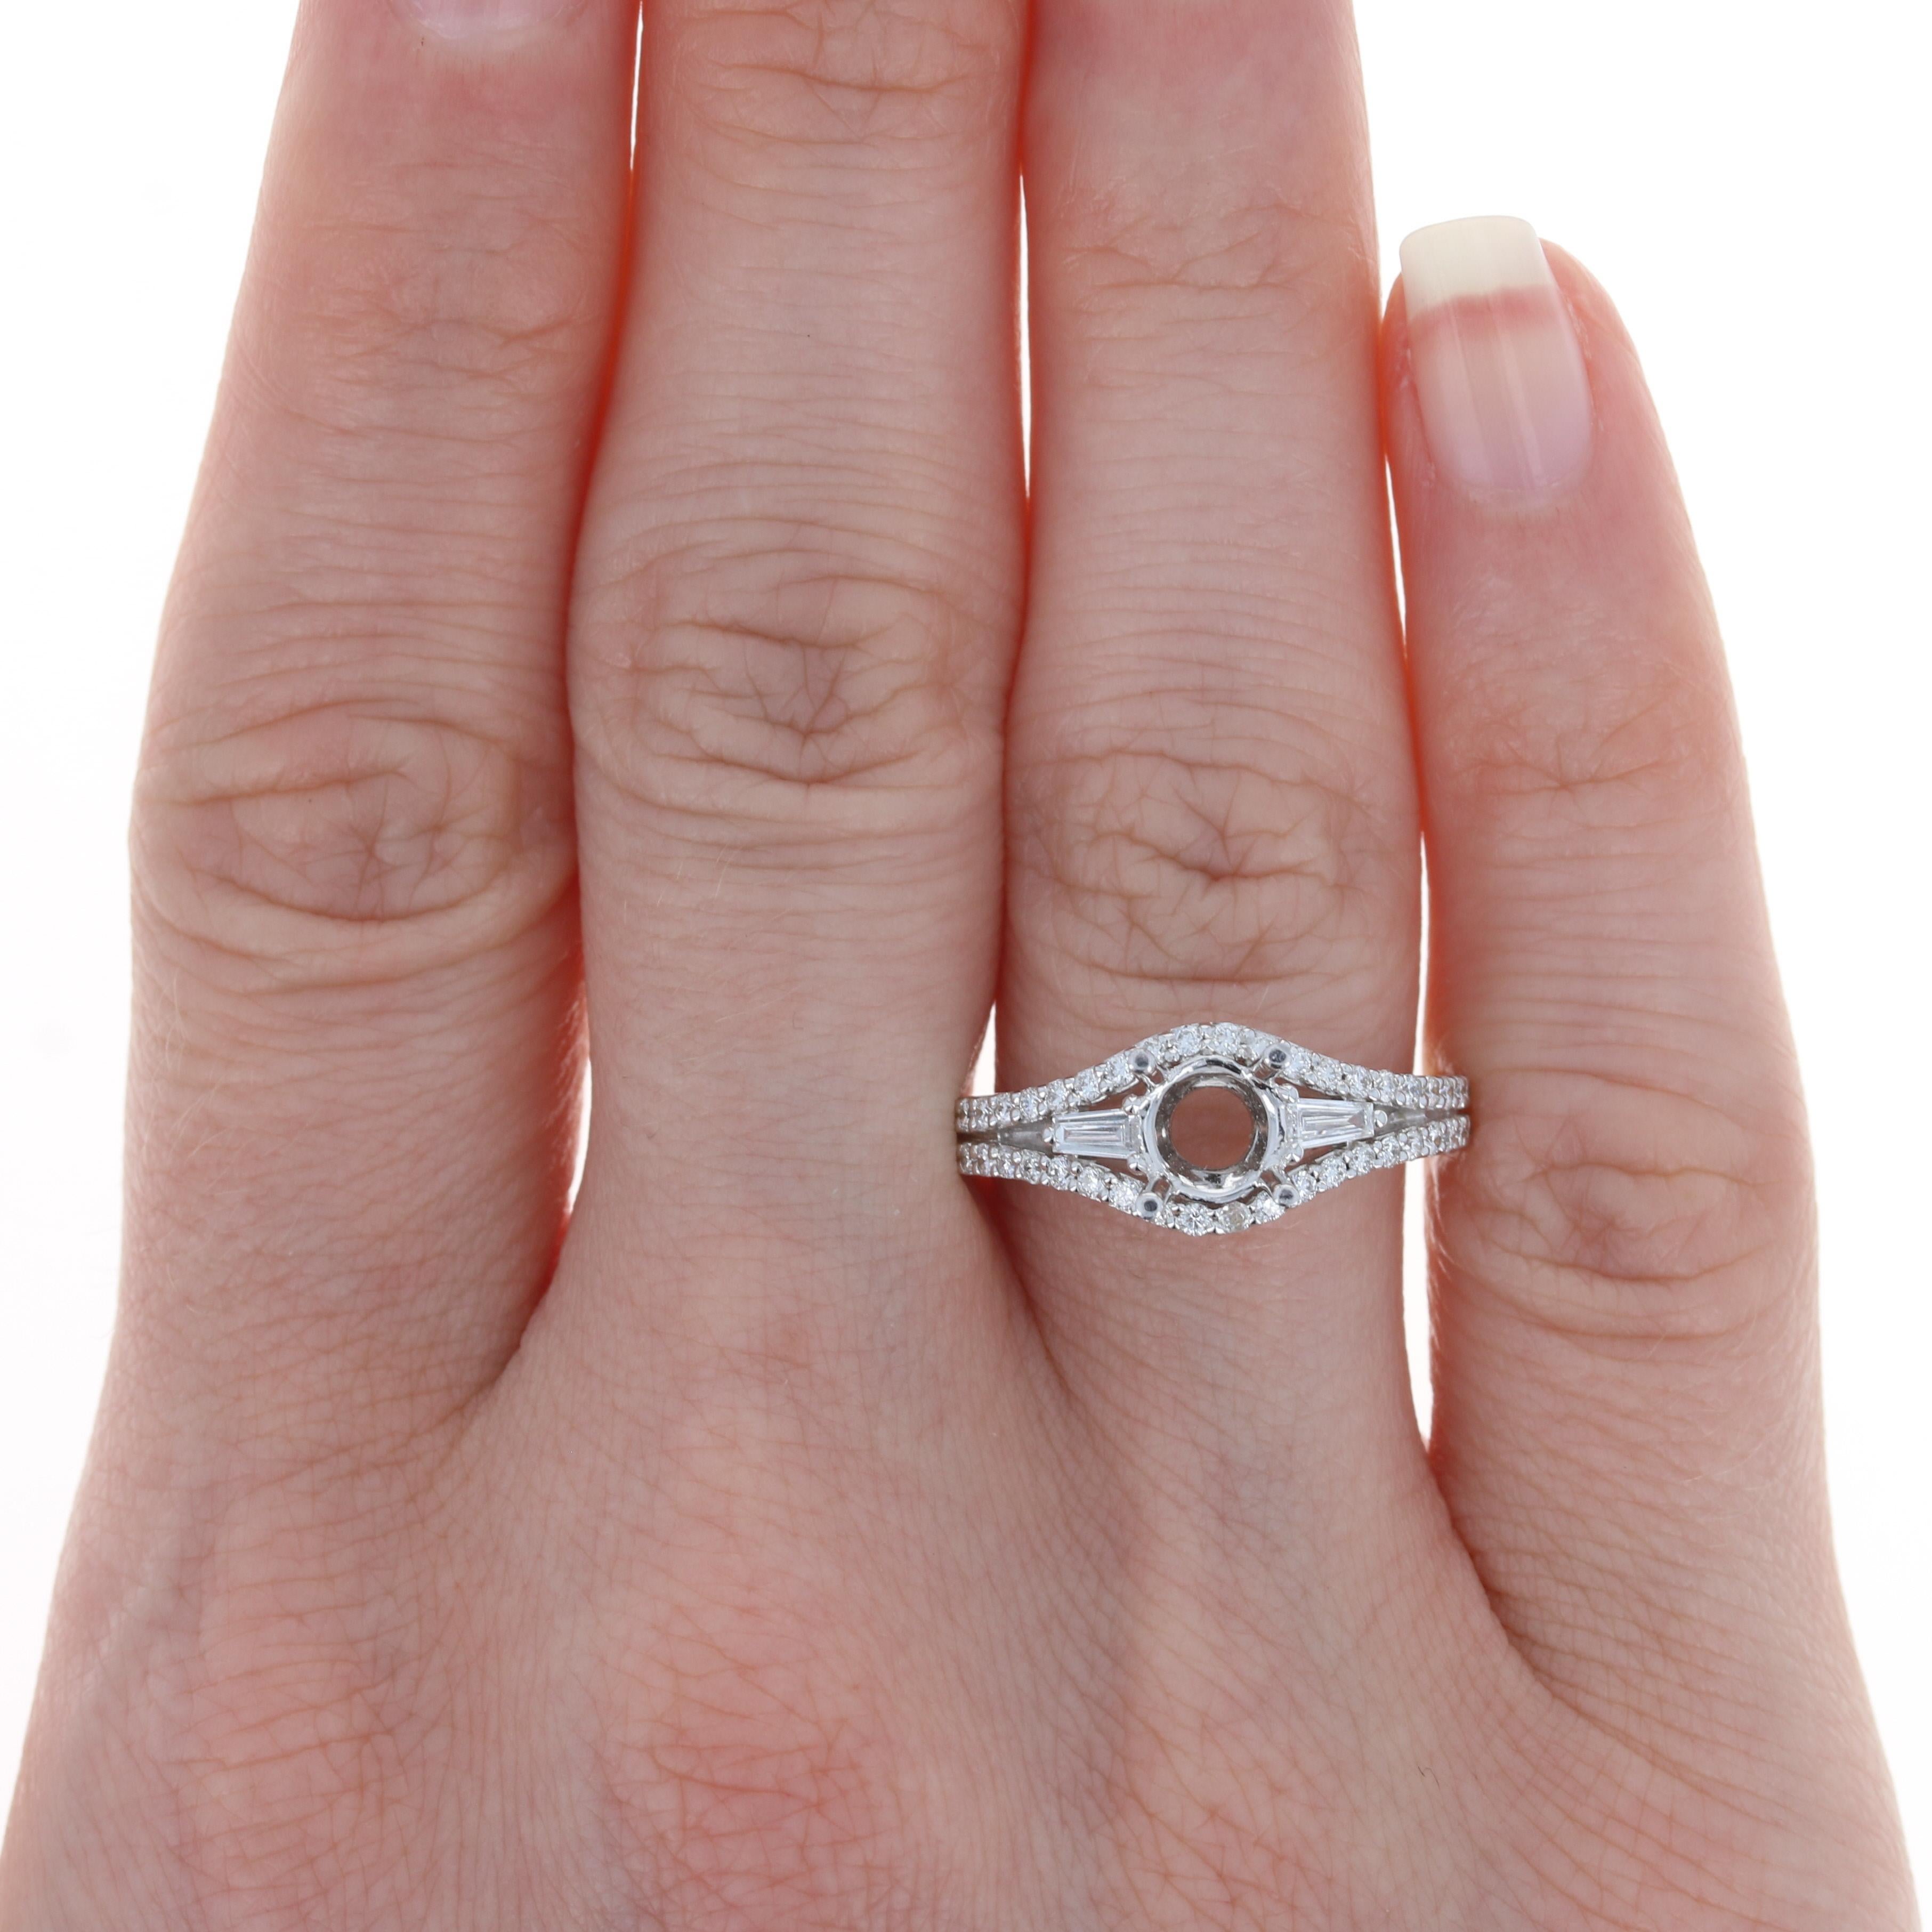 Your search for the perfect setting for your diamond solitaire or heirloom gemstone ends here with this elegant semi-mount ring! Fashioned in high purity 18k white gold, this NEW piece features a four-pronged mounting that will accommodate a stone